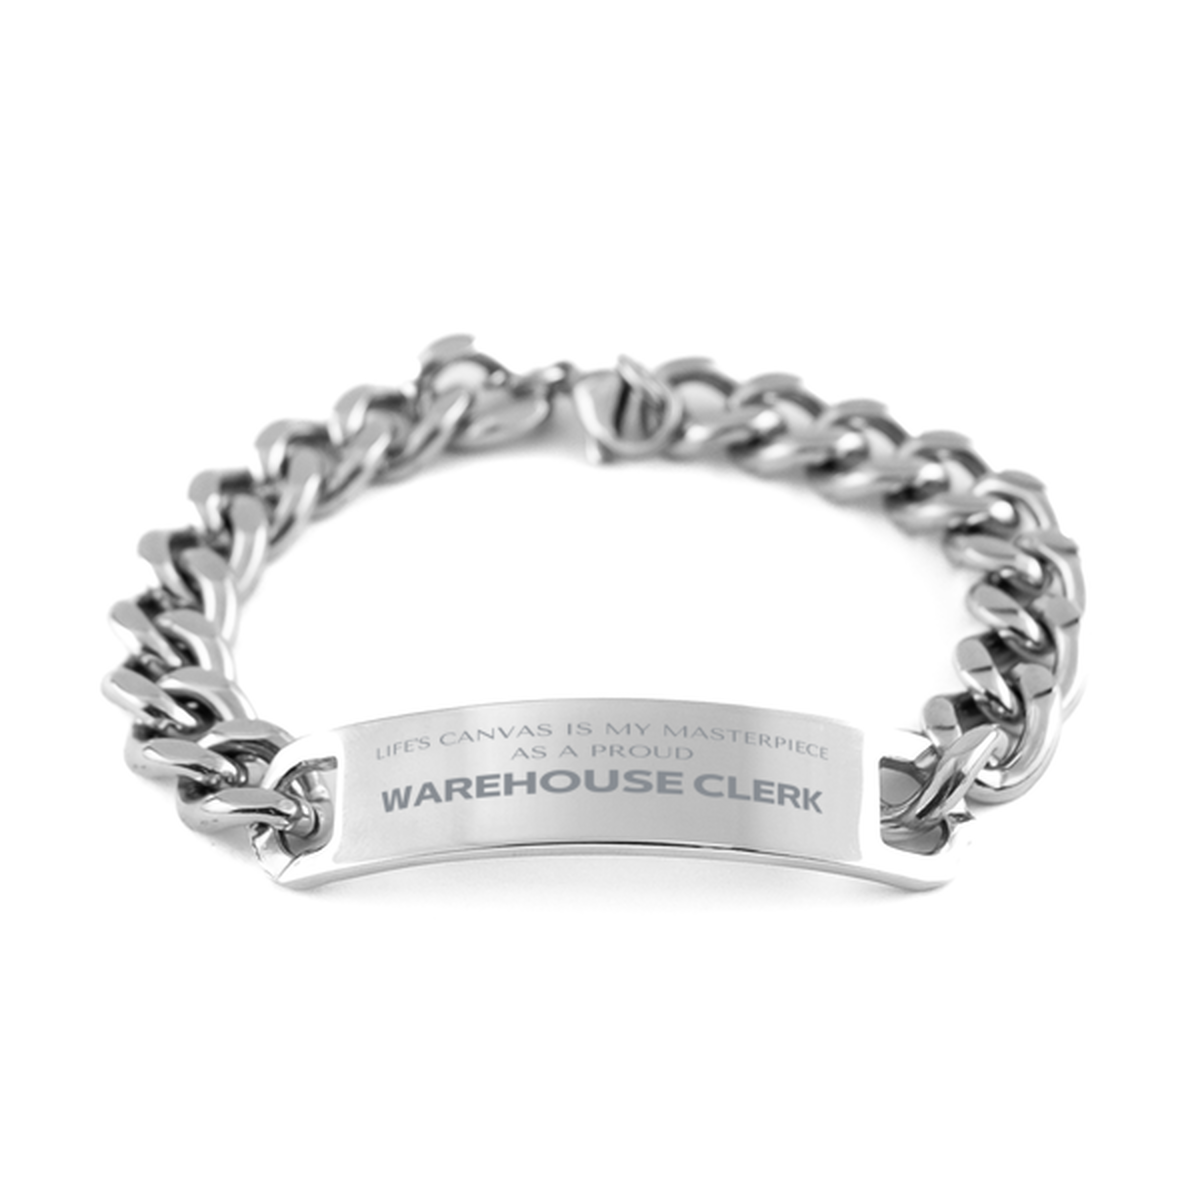 Proud Warehouse Clerk Gifts, Life's canvas is my masterpiece, Epic Birthday Christmas Unique Cuban Chain Stainless Steel Bracelet For Warehouse Clerk, Coworkers, Men, Women, Friends